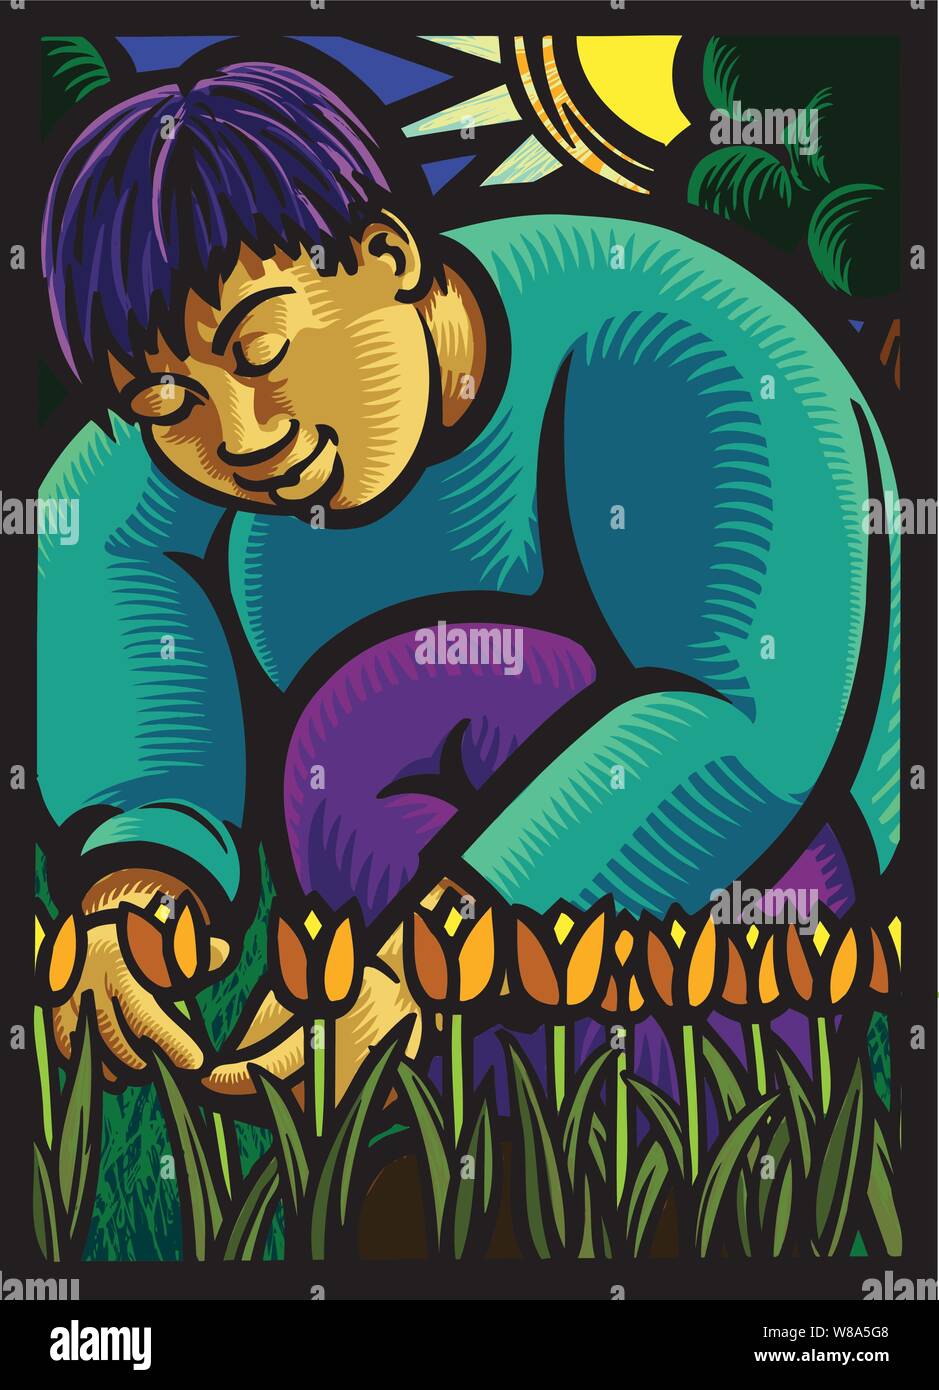 Asian male gardener tending to a row of tulips in a stark heavy black line style like stained glass illustration with sun & trees as a backdrop Stock Vector